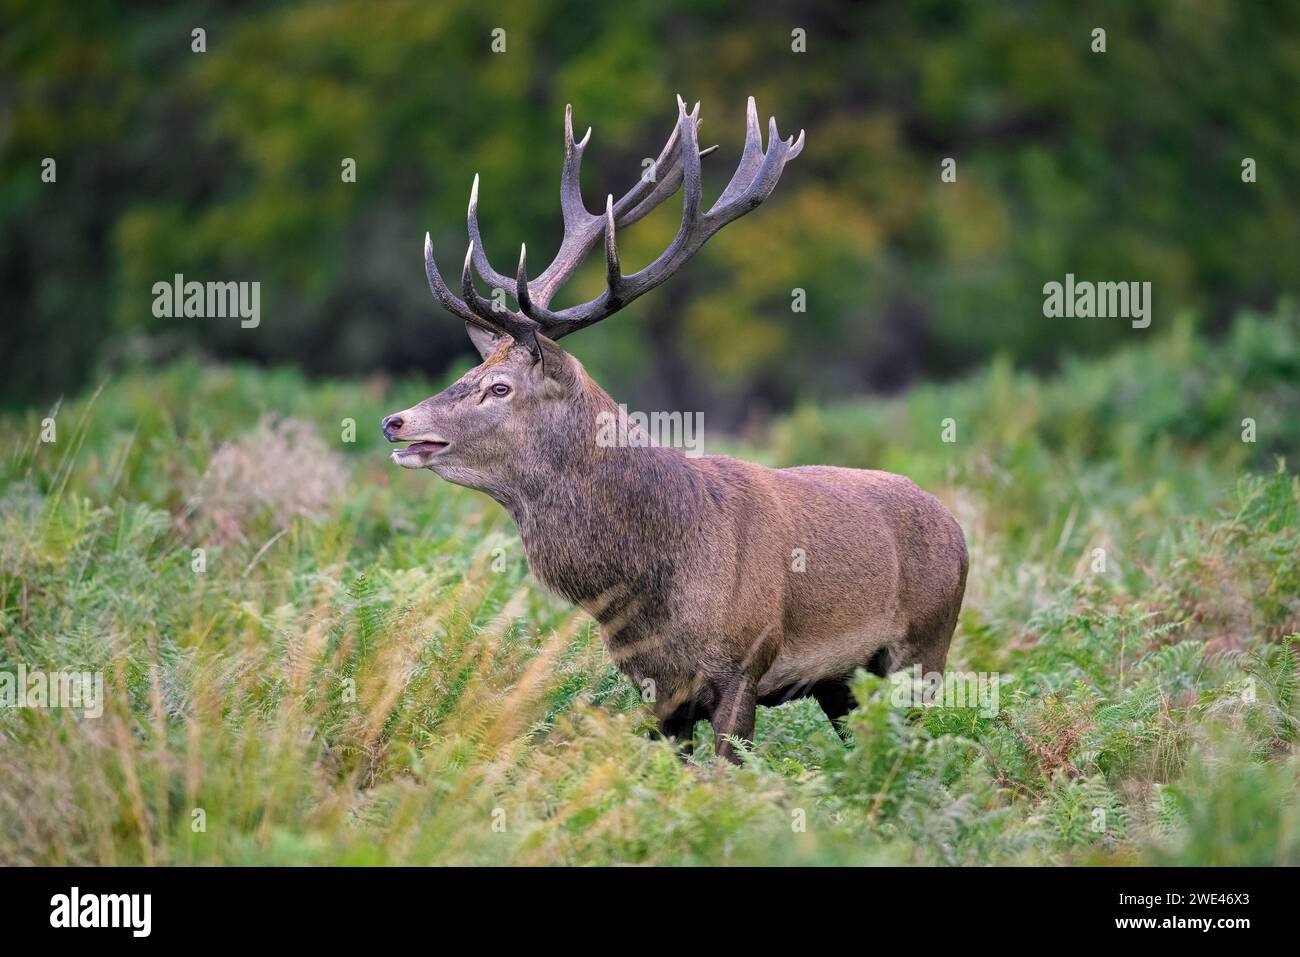 Red deer (Cervus elaphus) stag standing among bracken ferns in forest during the rut in autumn / fall Stock Photo